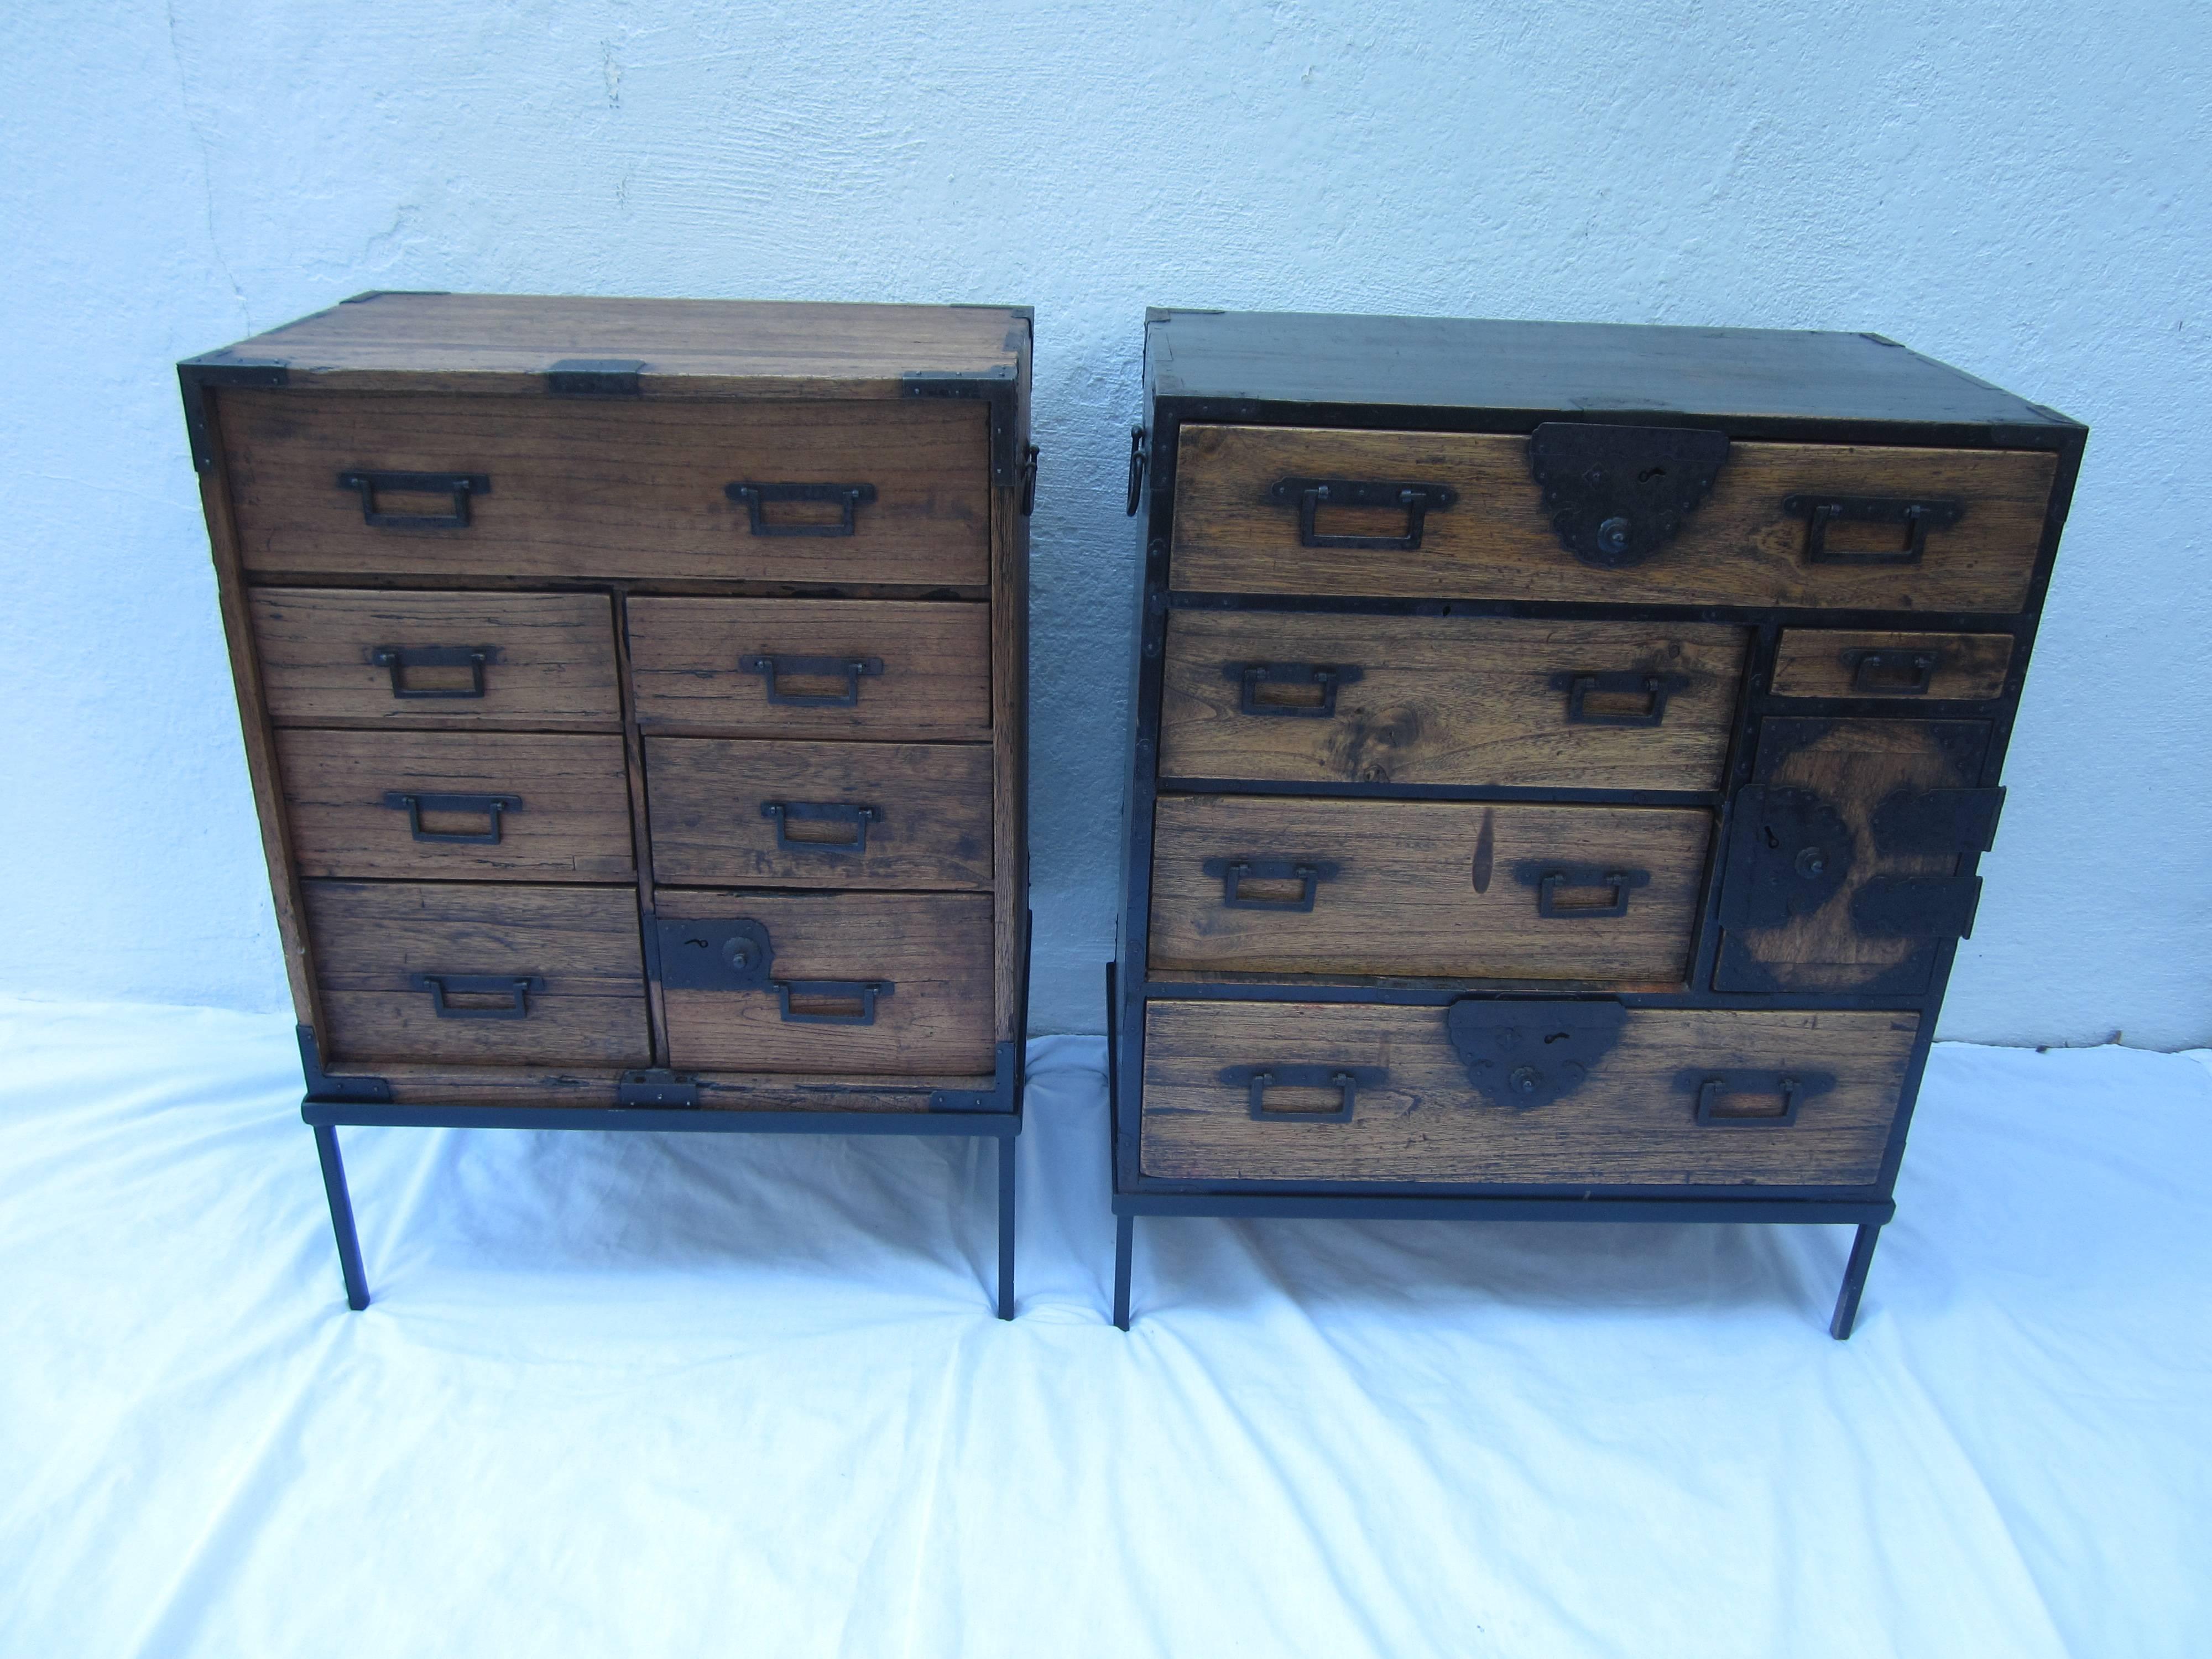 A complementary pair of Japanese elmwood Tansus on custom modern iron stands.

The chest on the left.... unfinished elmwood.

It measures: 20